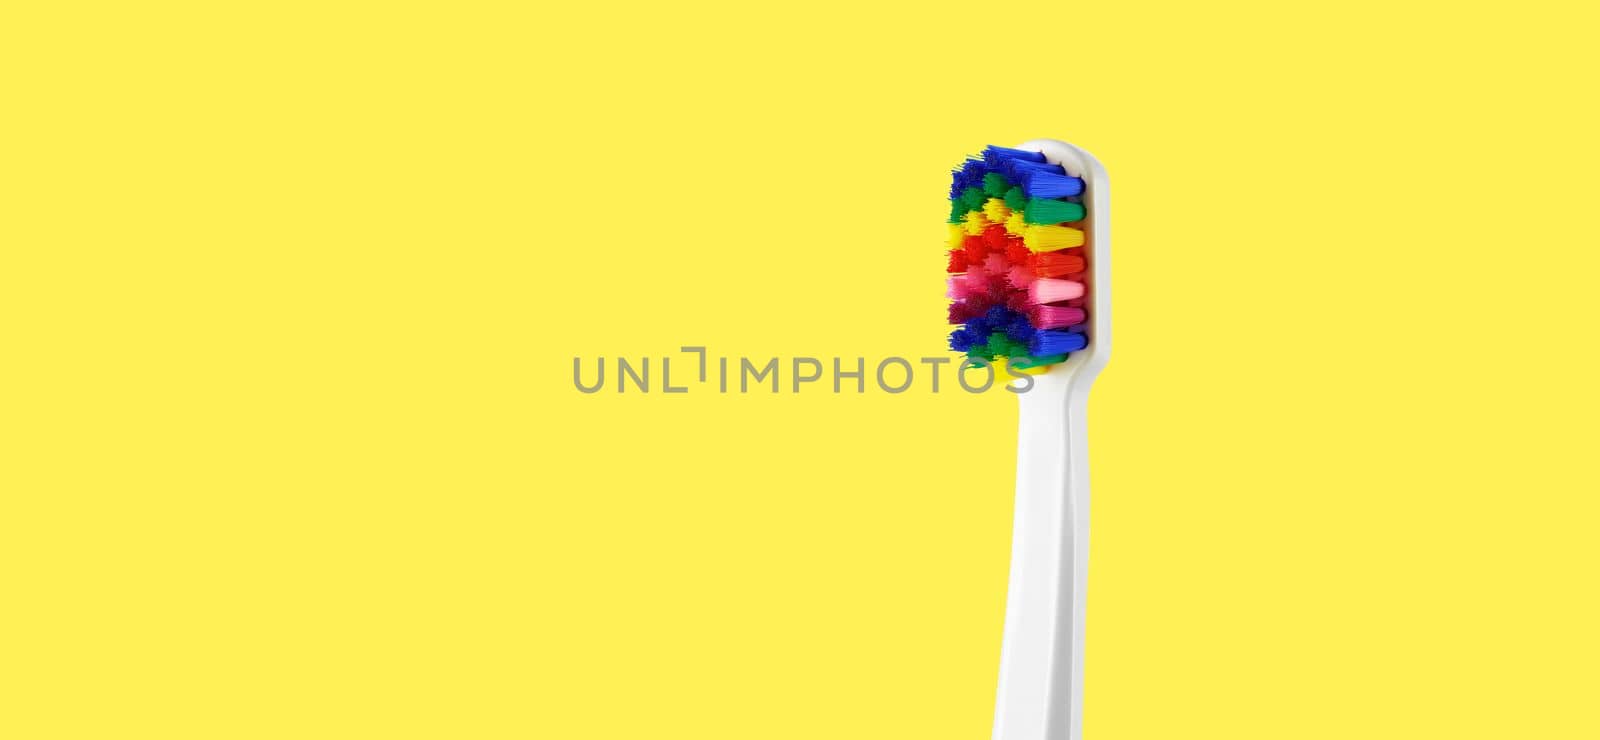 White toothbrush with multicolored bristles on yellow background. Bristles in all colors of the rainbow. Rainbow toothbrush with white knob. Fashionable oral care by EvgeniyQW